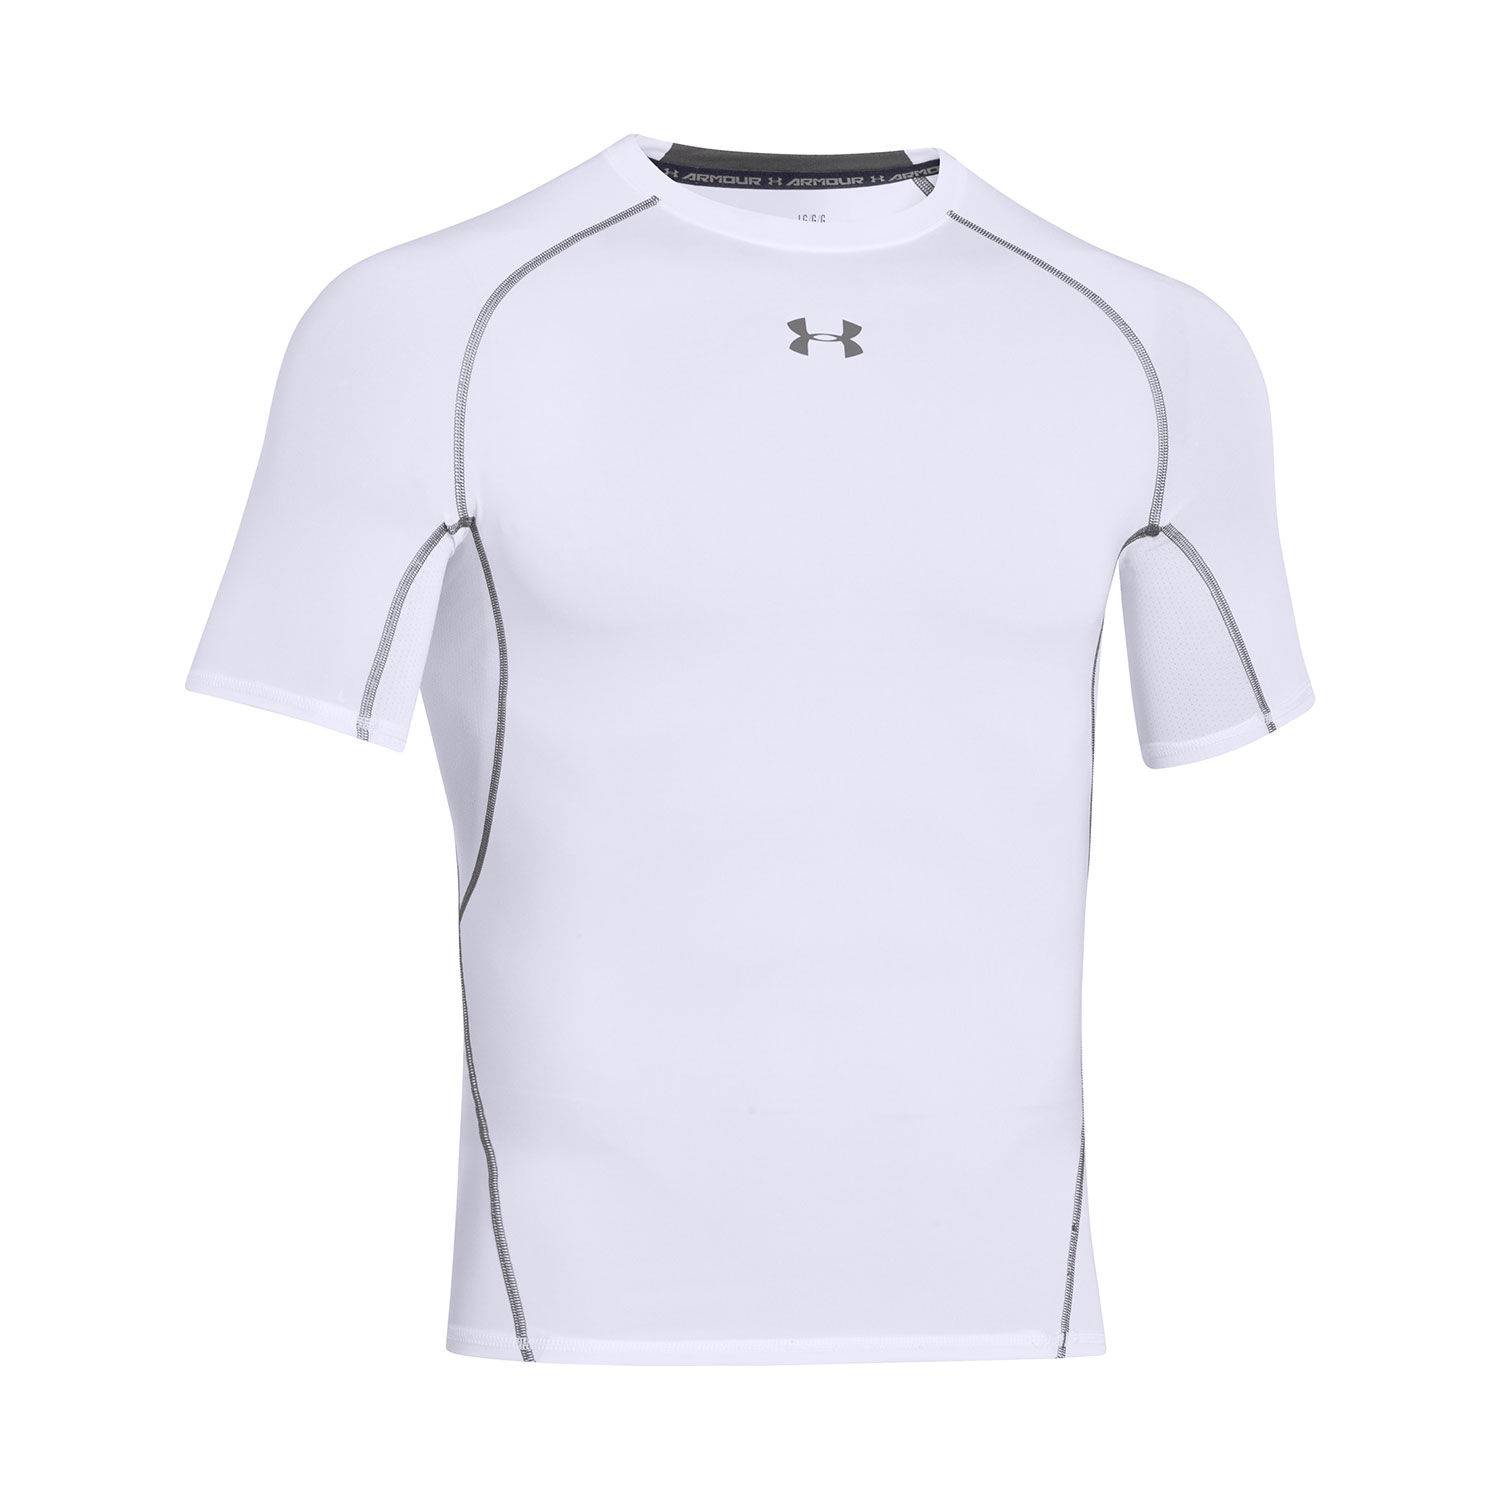 under armour tee shirt compression